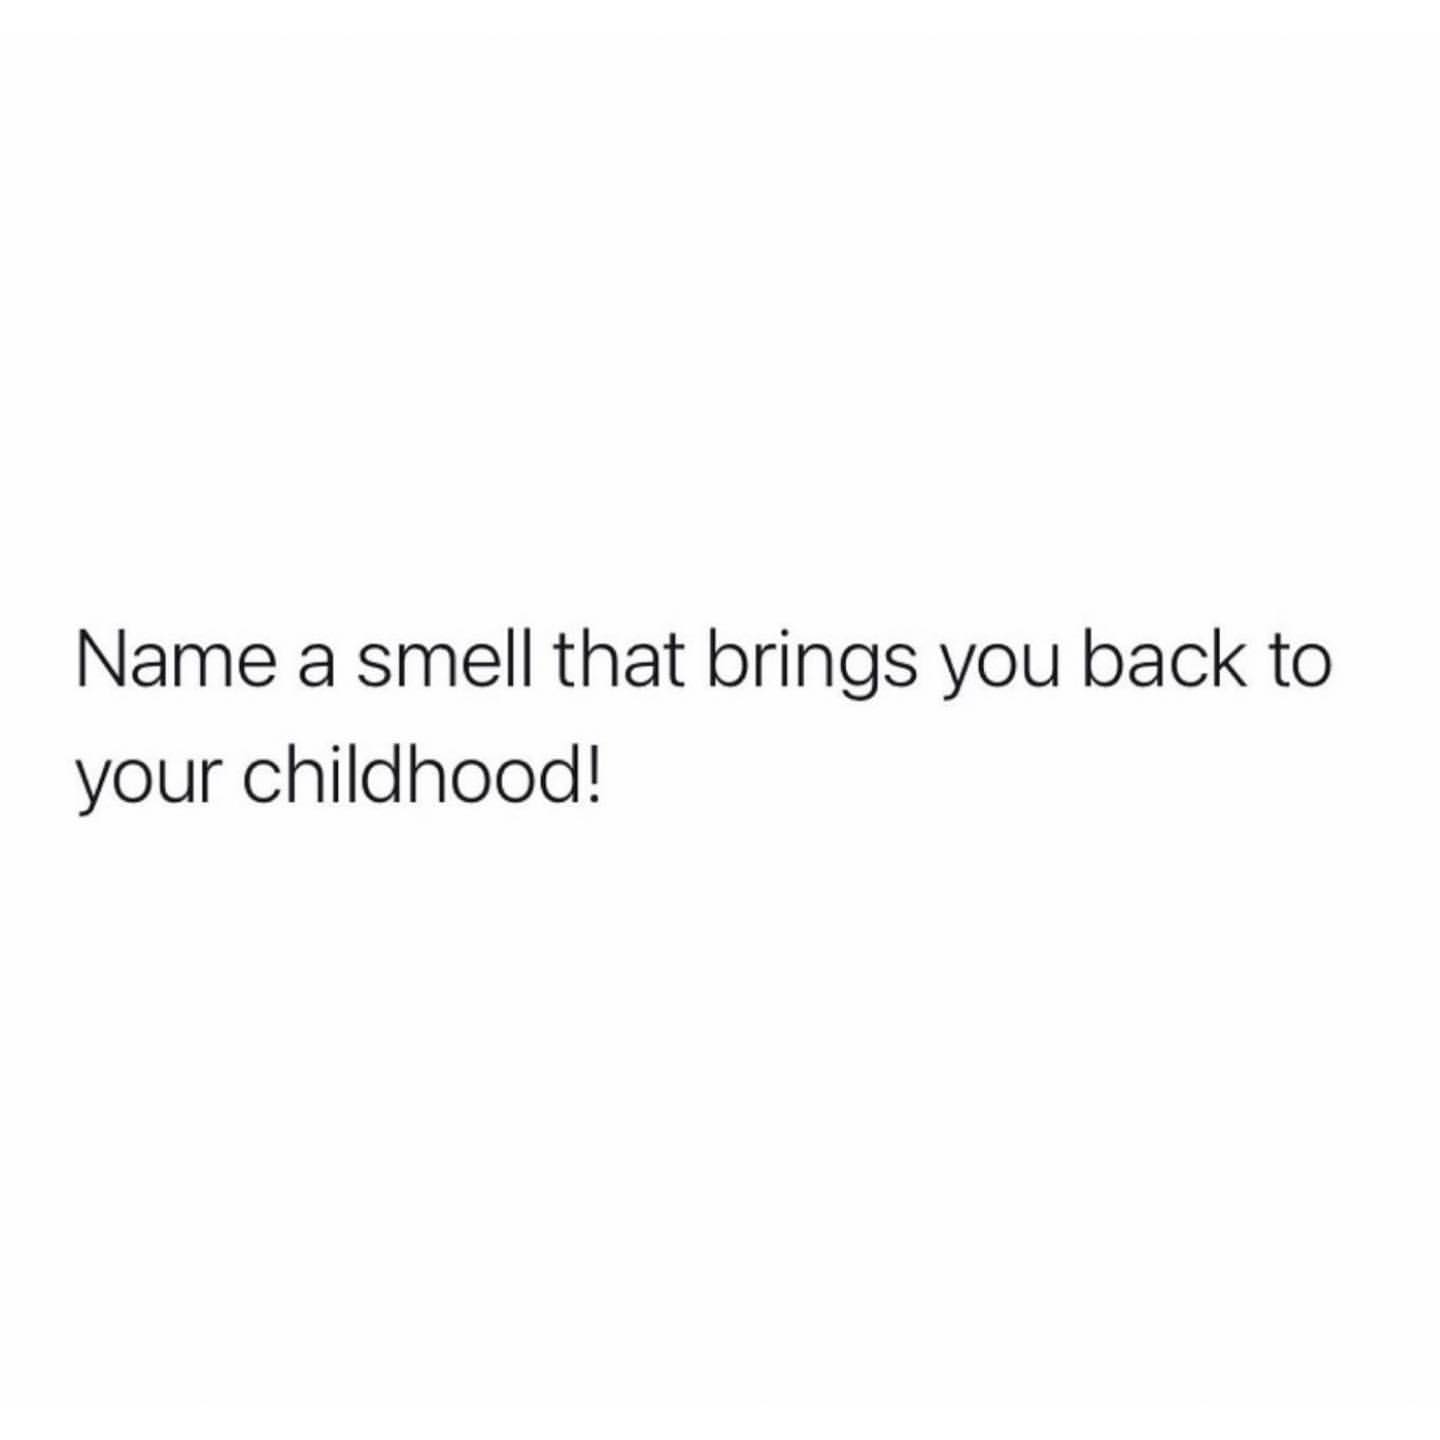 Name a smell that brings you back to your childhood!